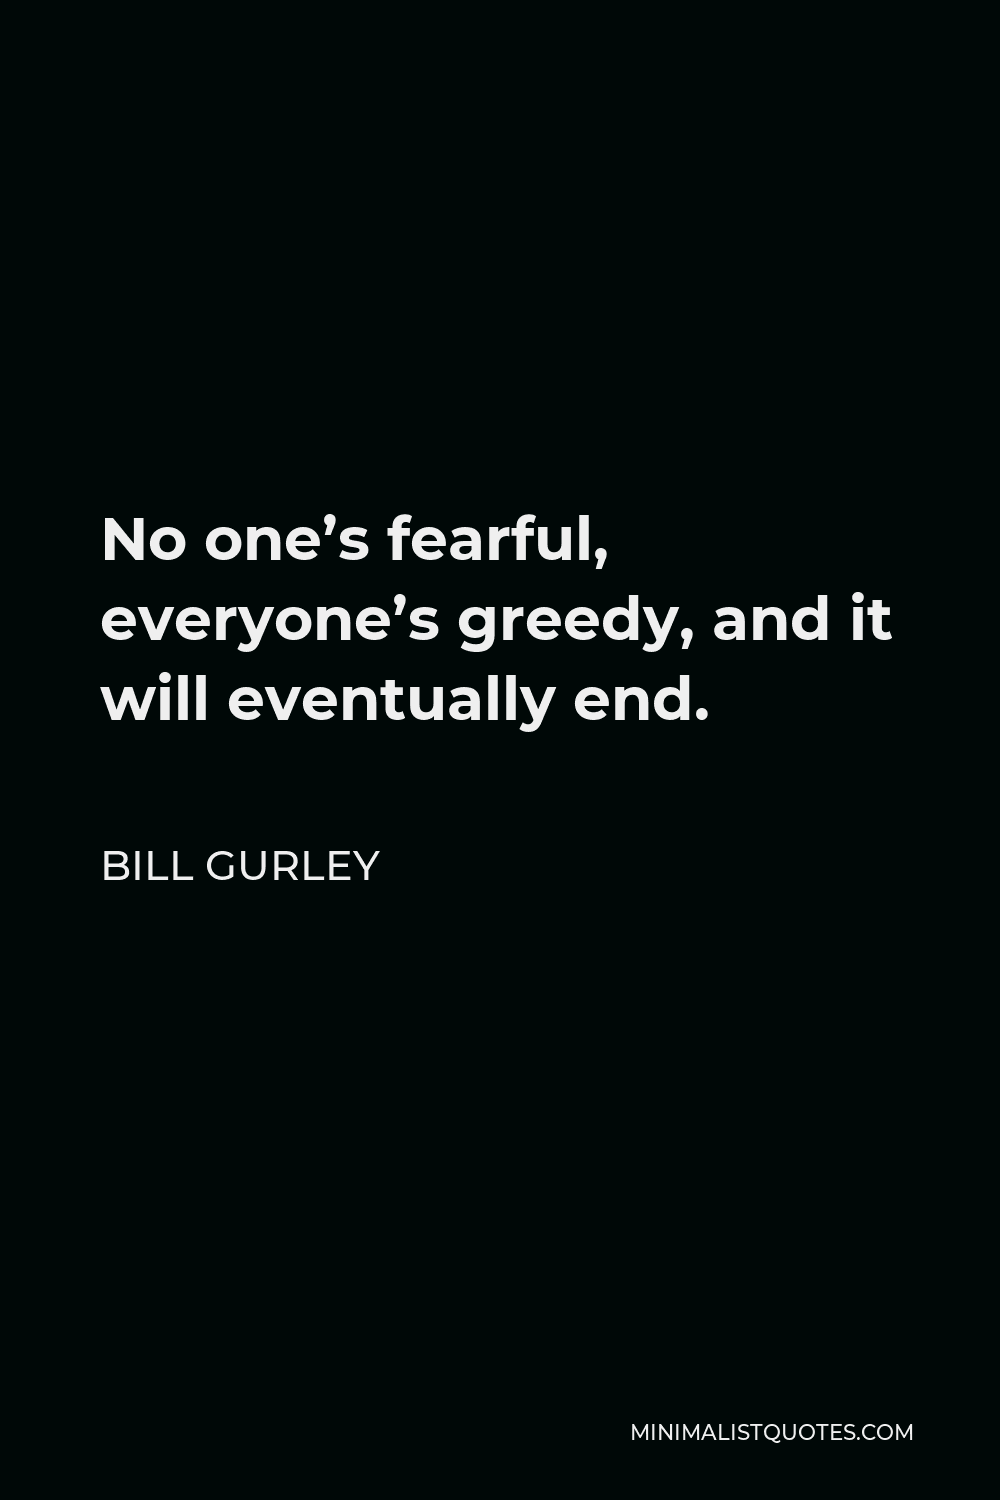 Bill Gurley Quote - No one’s fearful, everyone’s greedy, and it will eventually end.